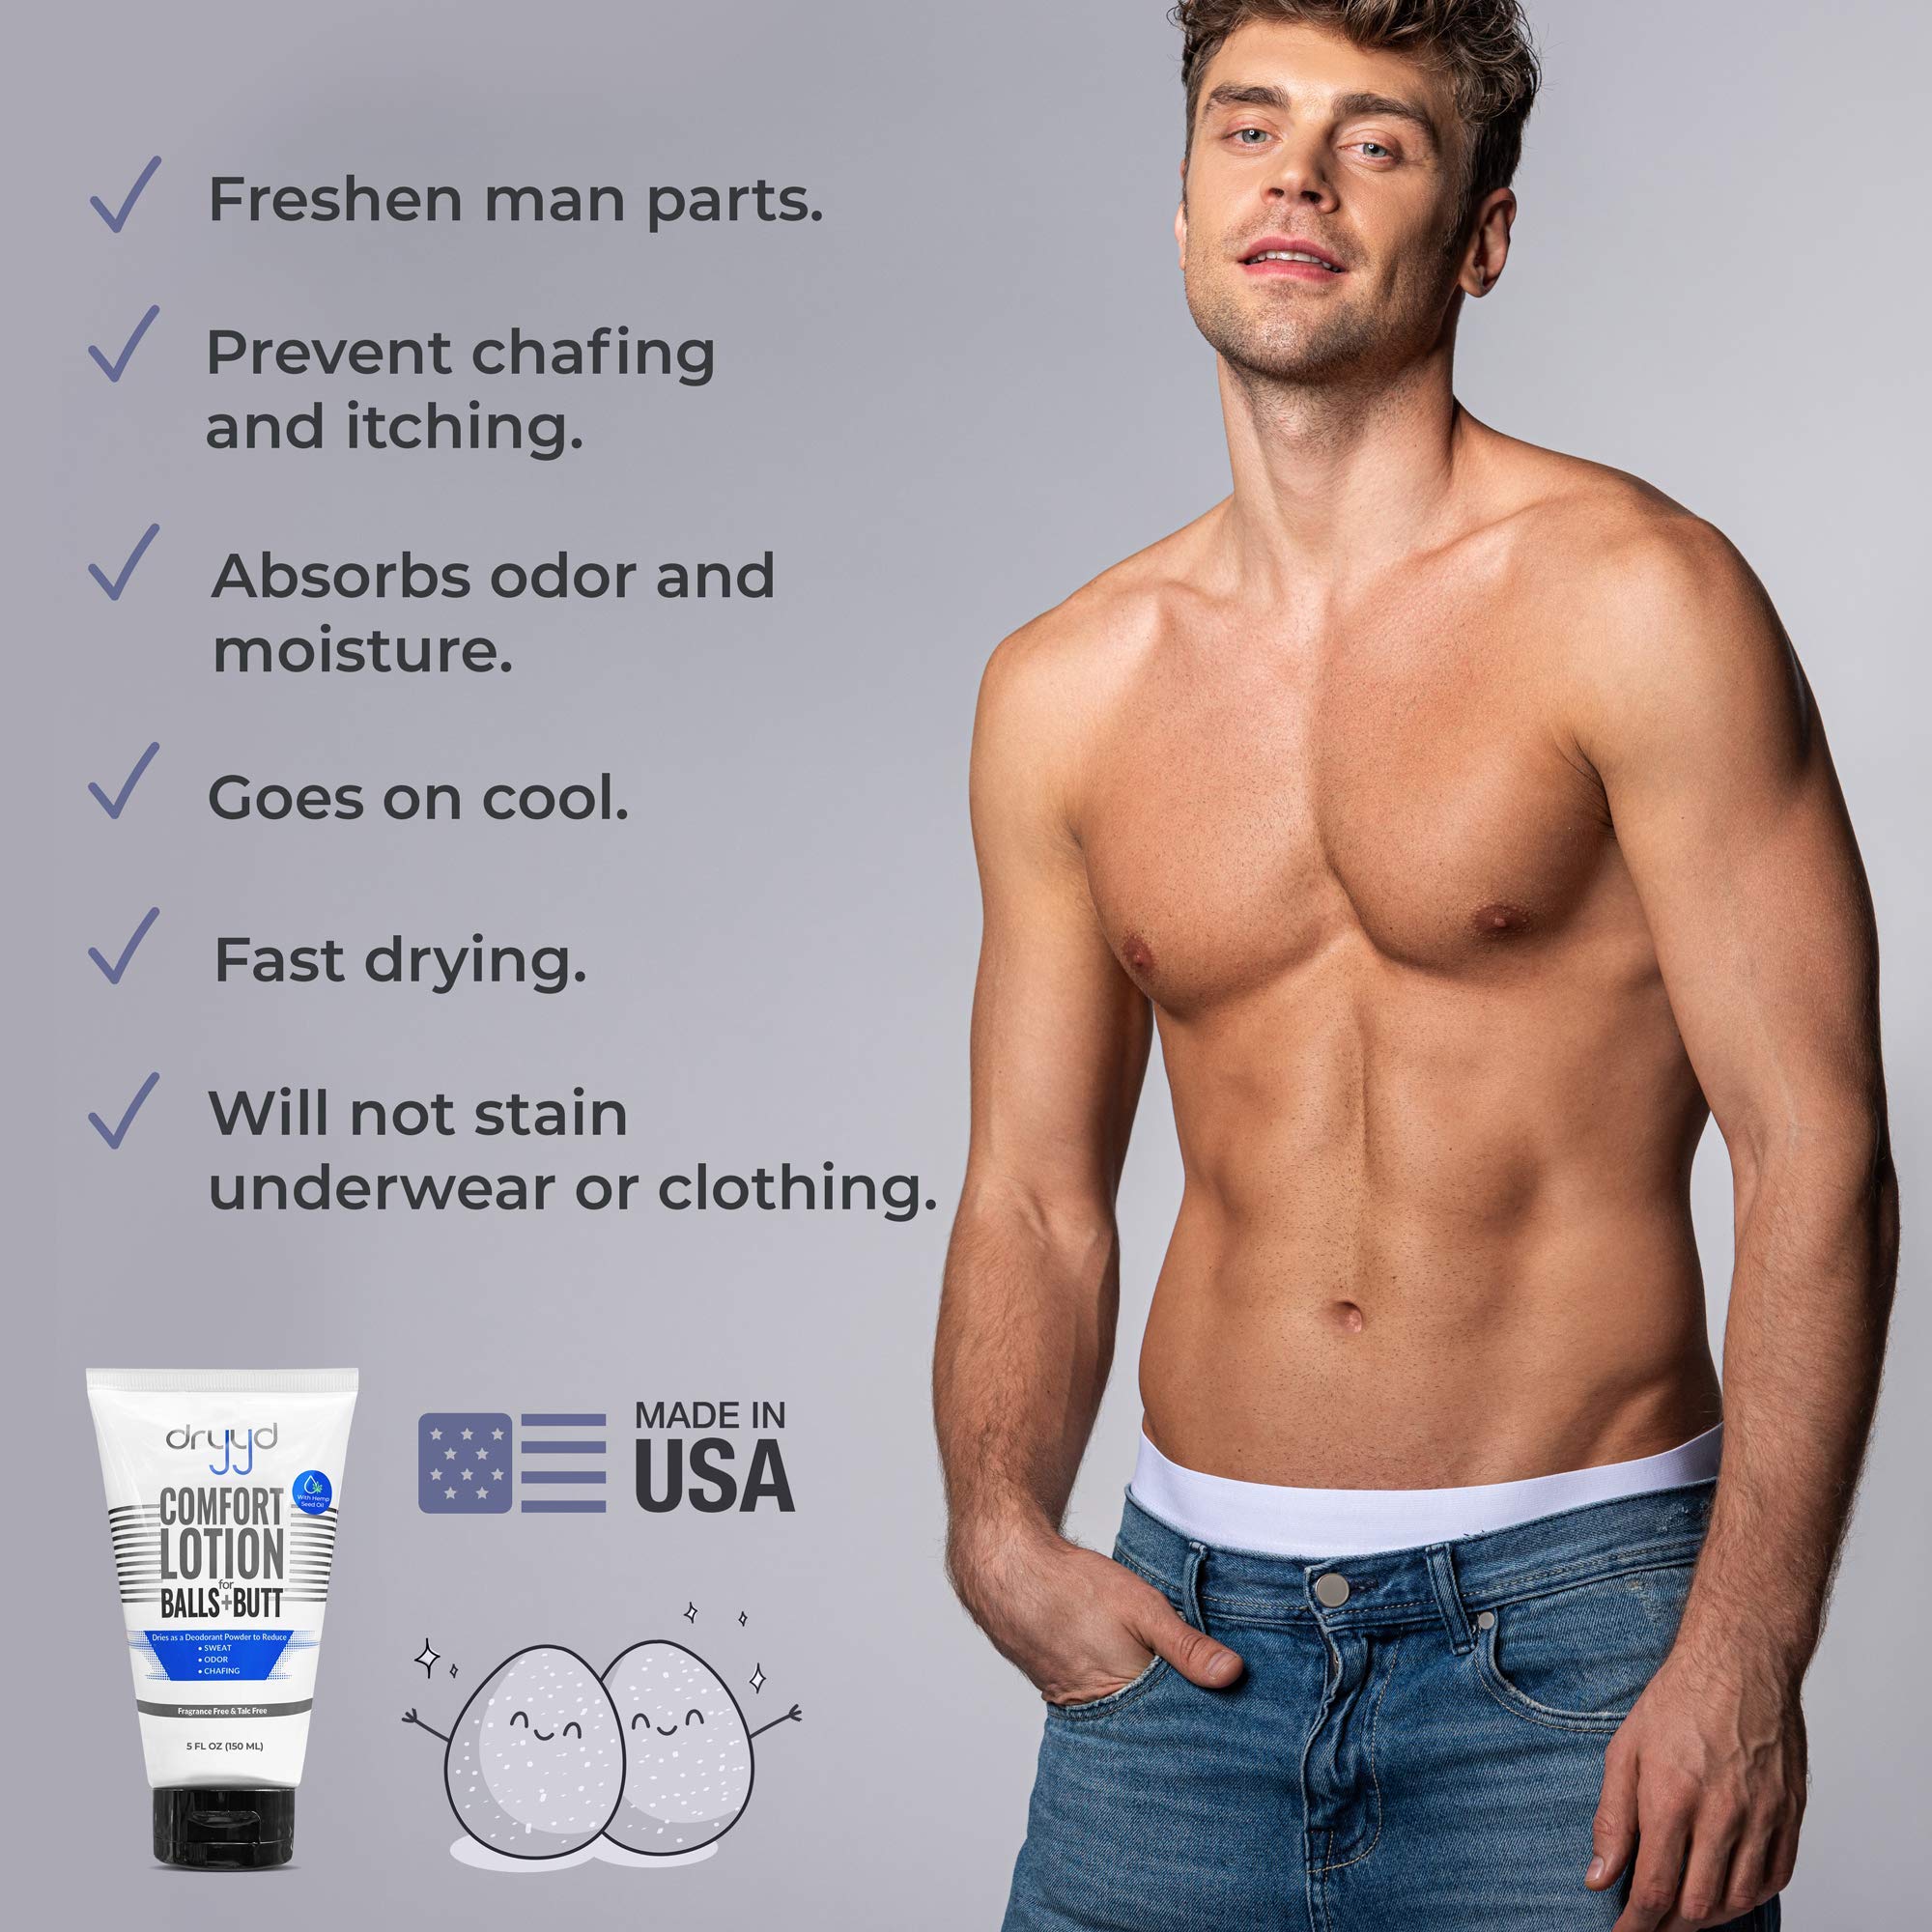 DRYYD Natural Antiperspirant Deodorant Lotion For Men and Women or Couples, Anti Chafe, No Talcum Powder, Aluminum Free, Fragrance Free, Ball Deodorant For Men, Reduce Sticky Boobs for Women, Bundle